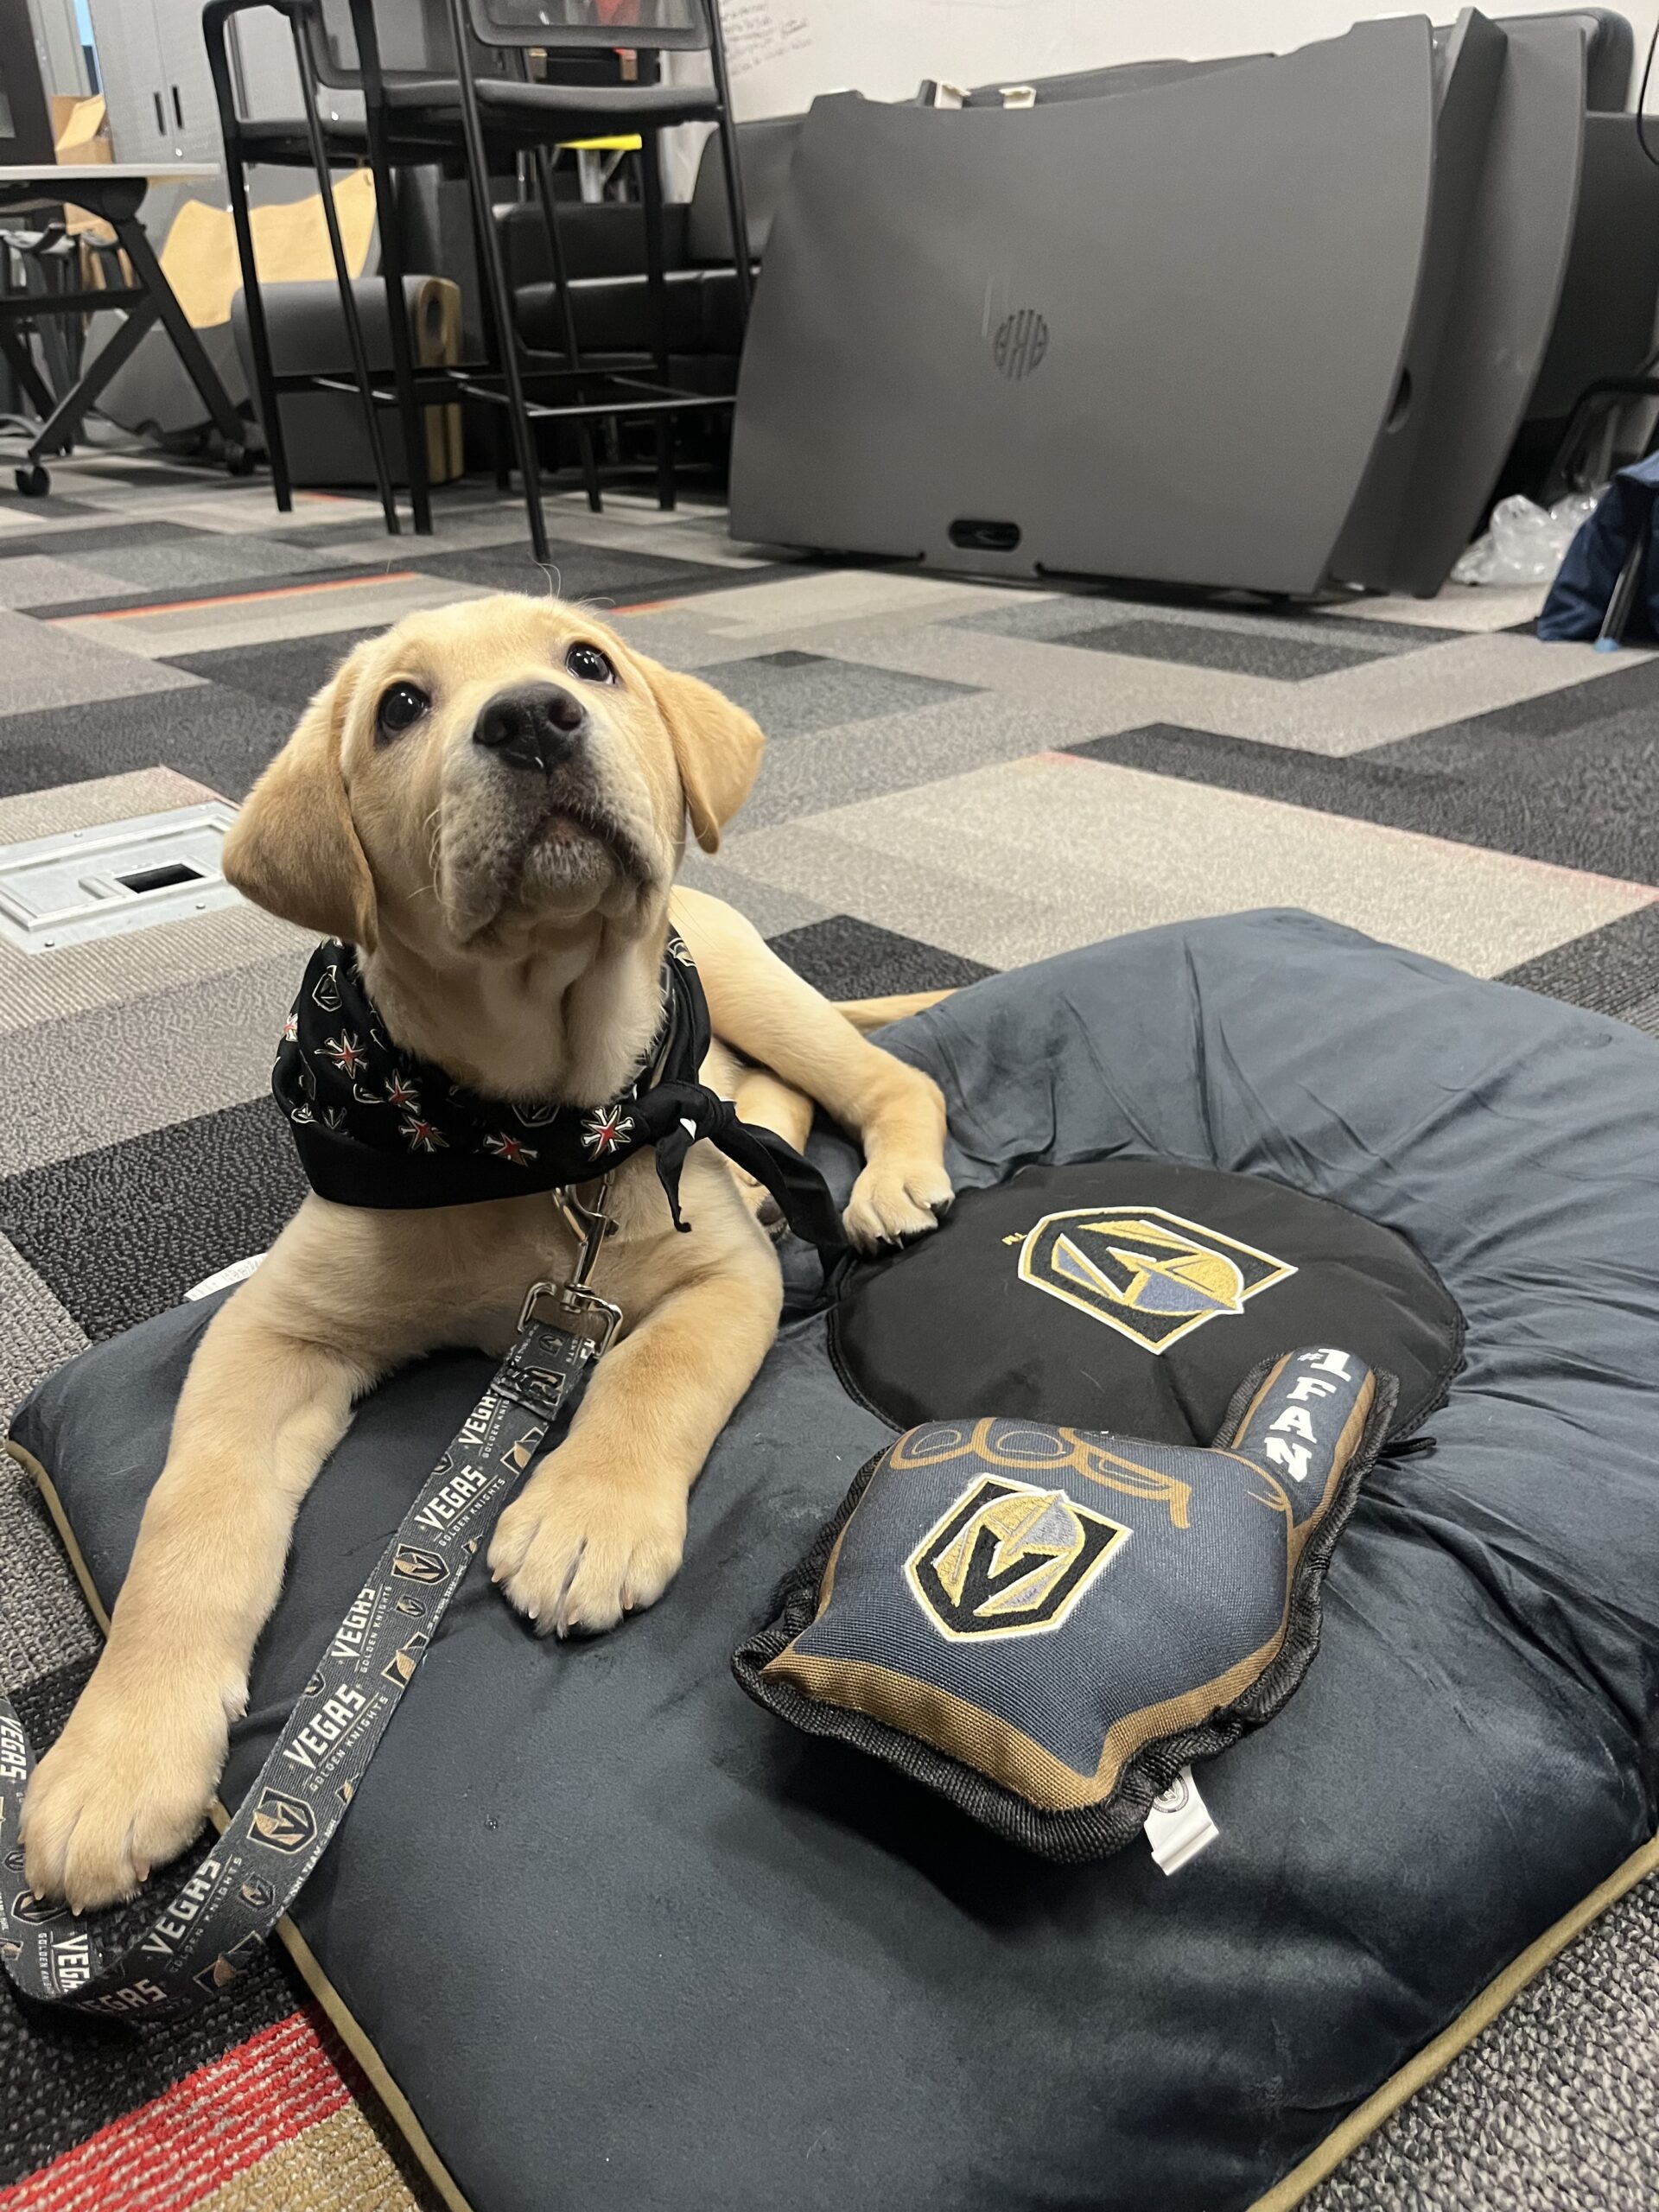 VGK dog Maverick surrounded by dog toys and accessories